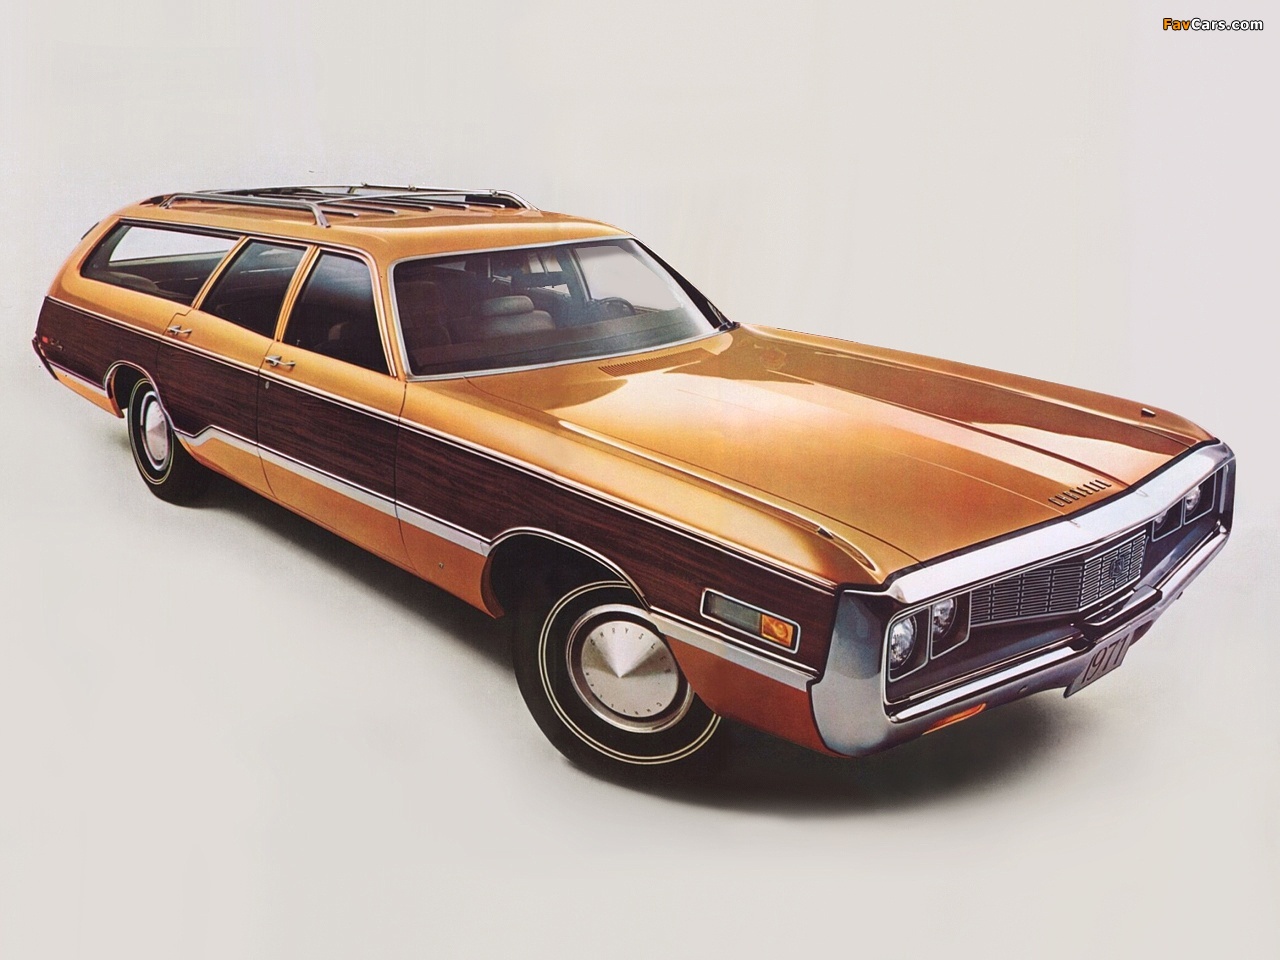 Chrysler Town & Country Station Wagon 1971 images (1280x960)